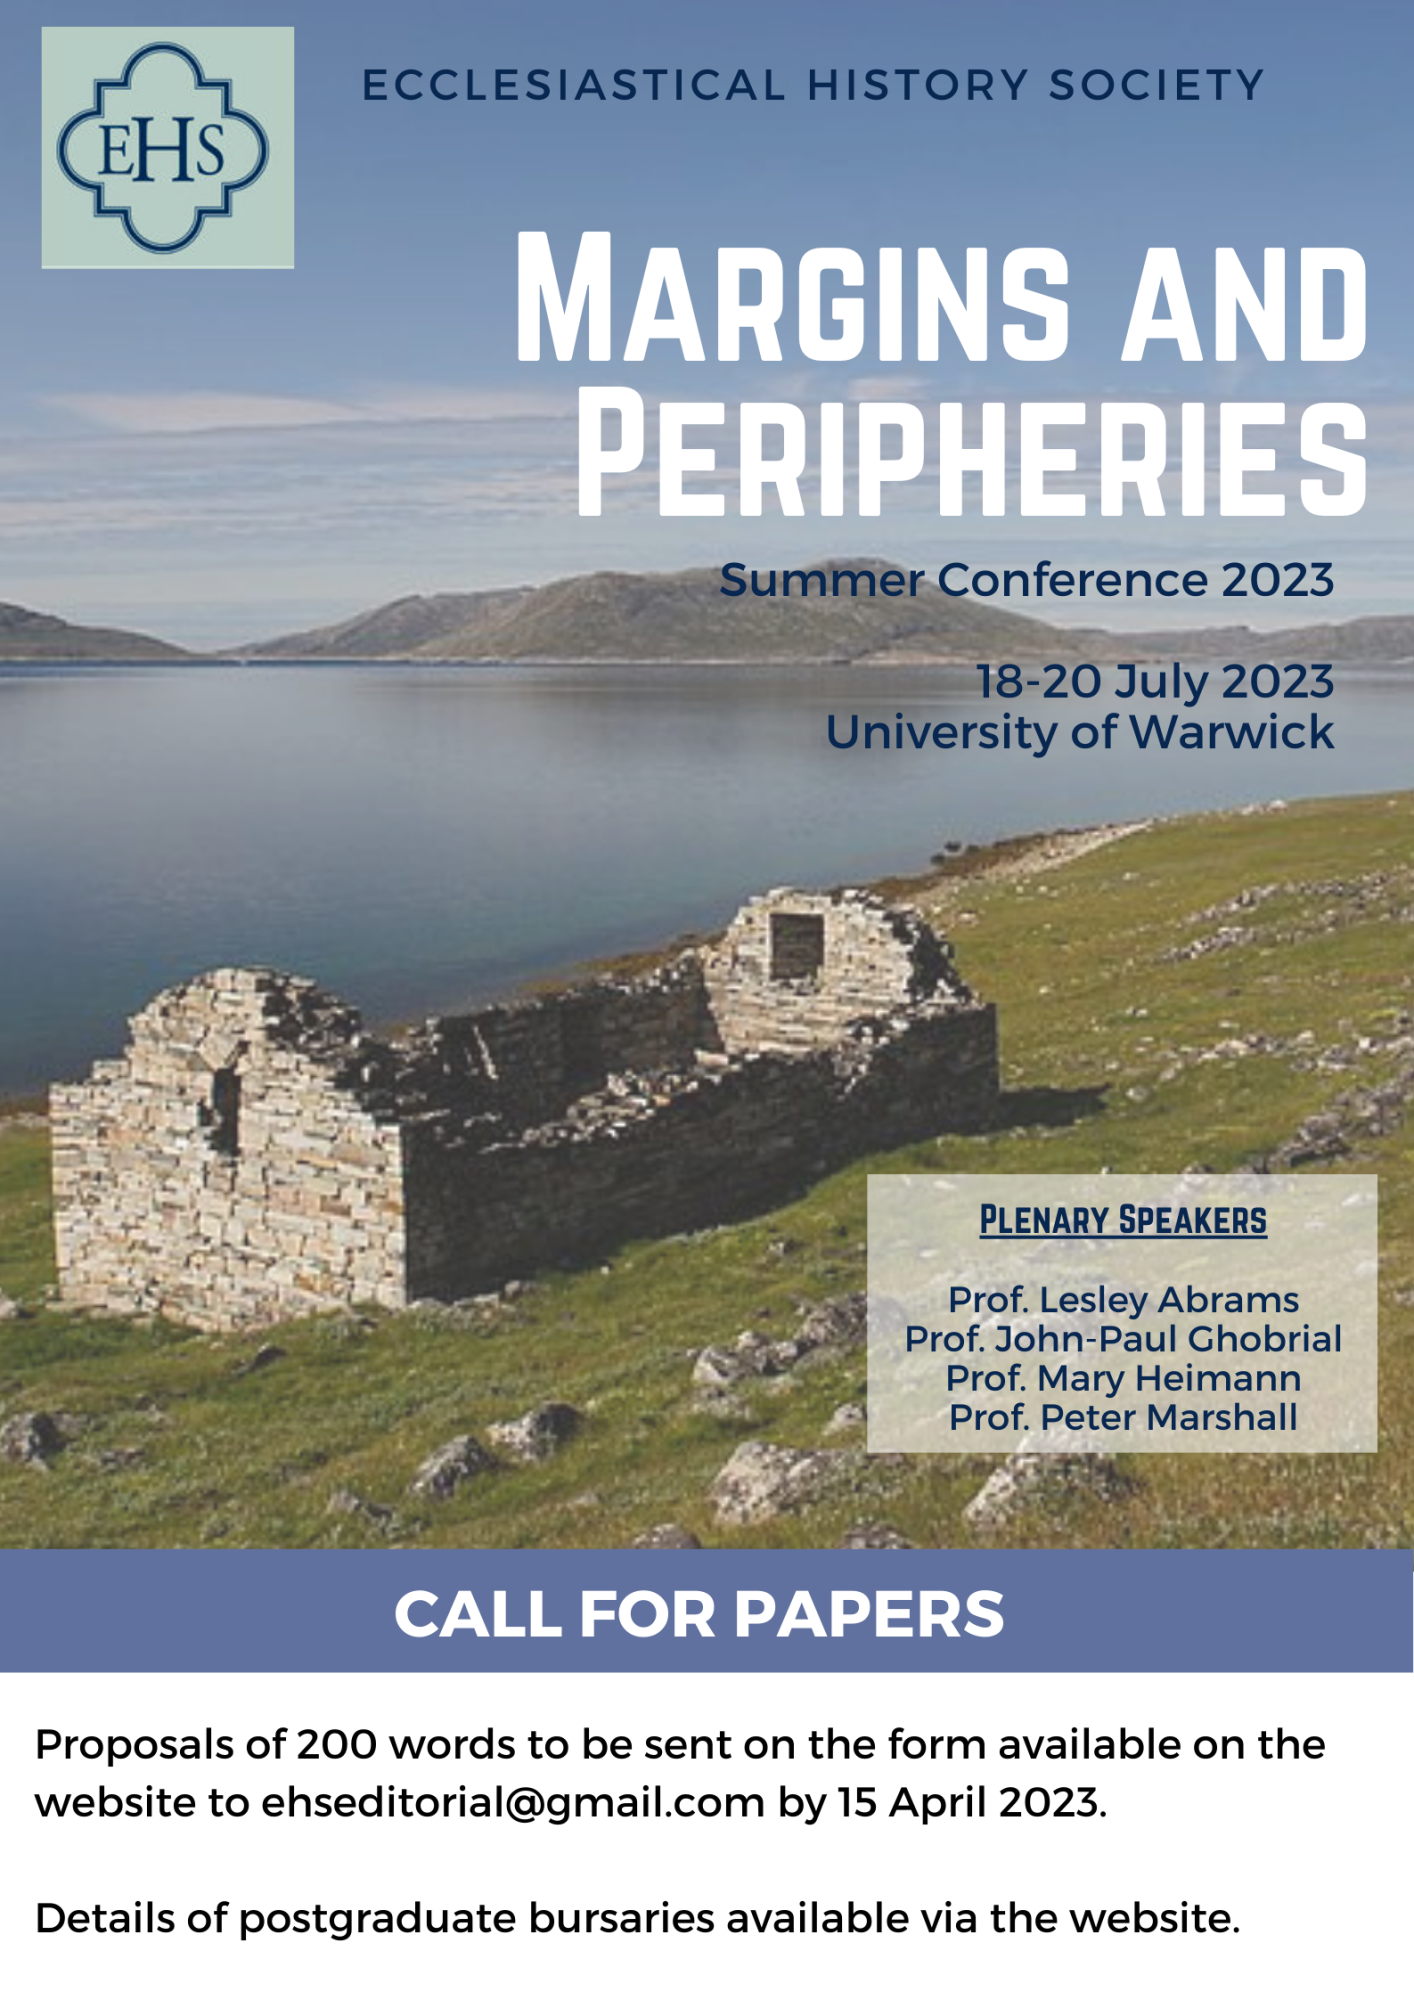 Summer Conference 2023: Margins and Peripheries